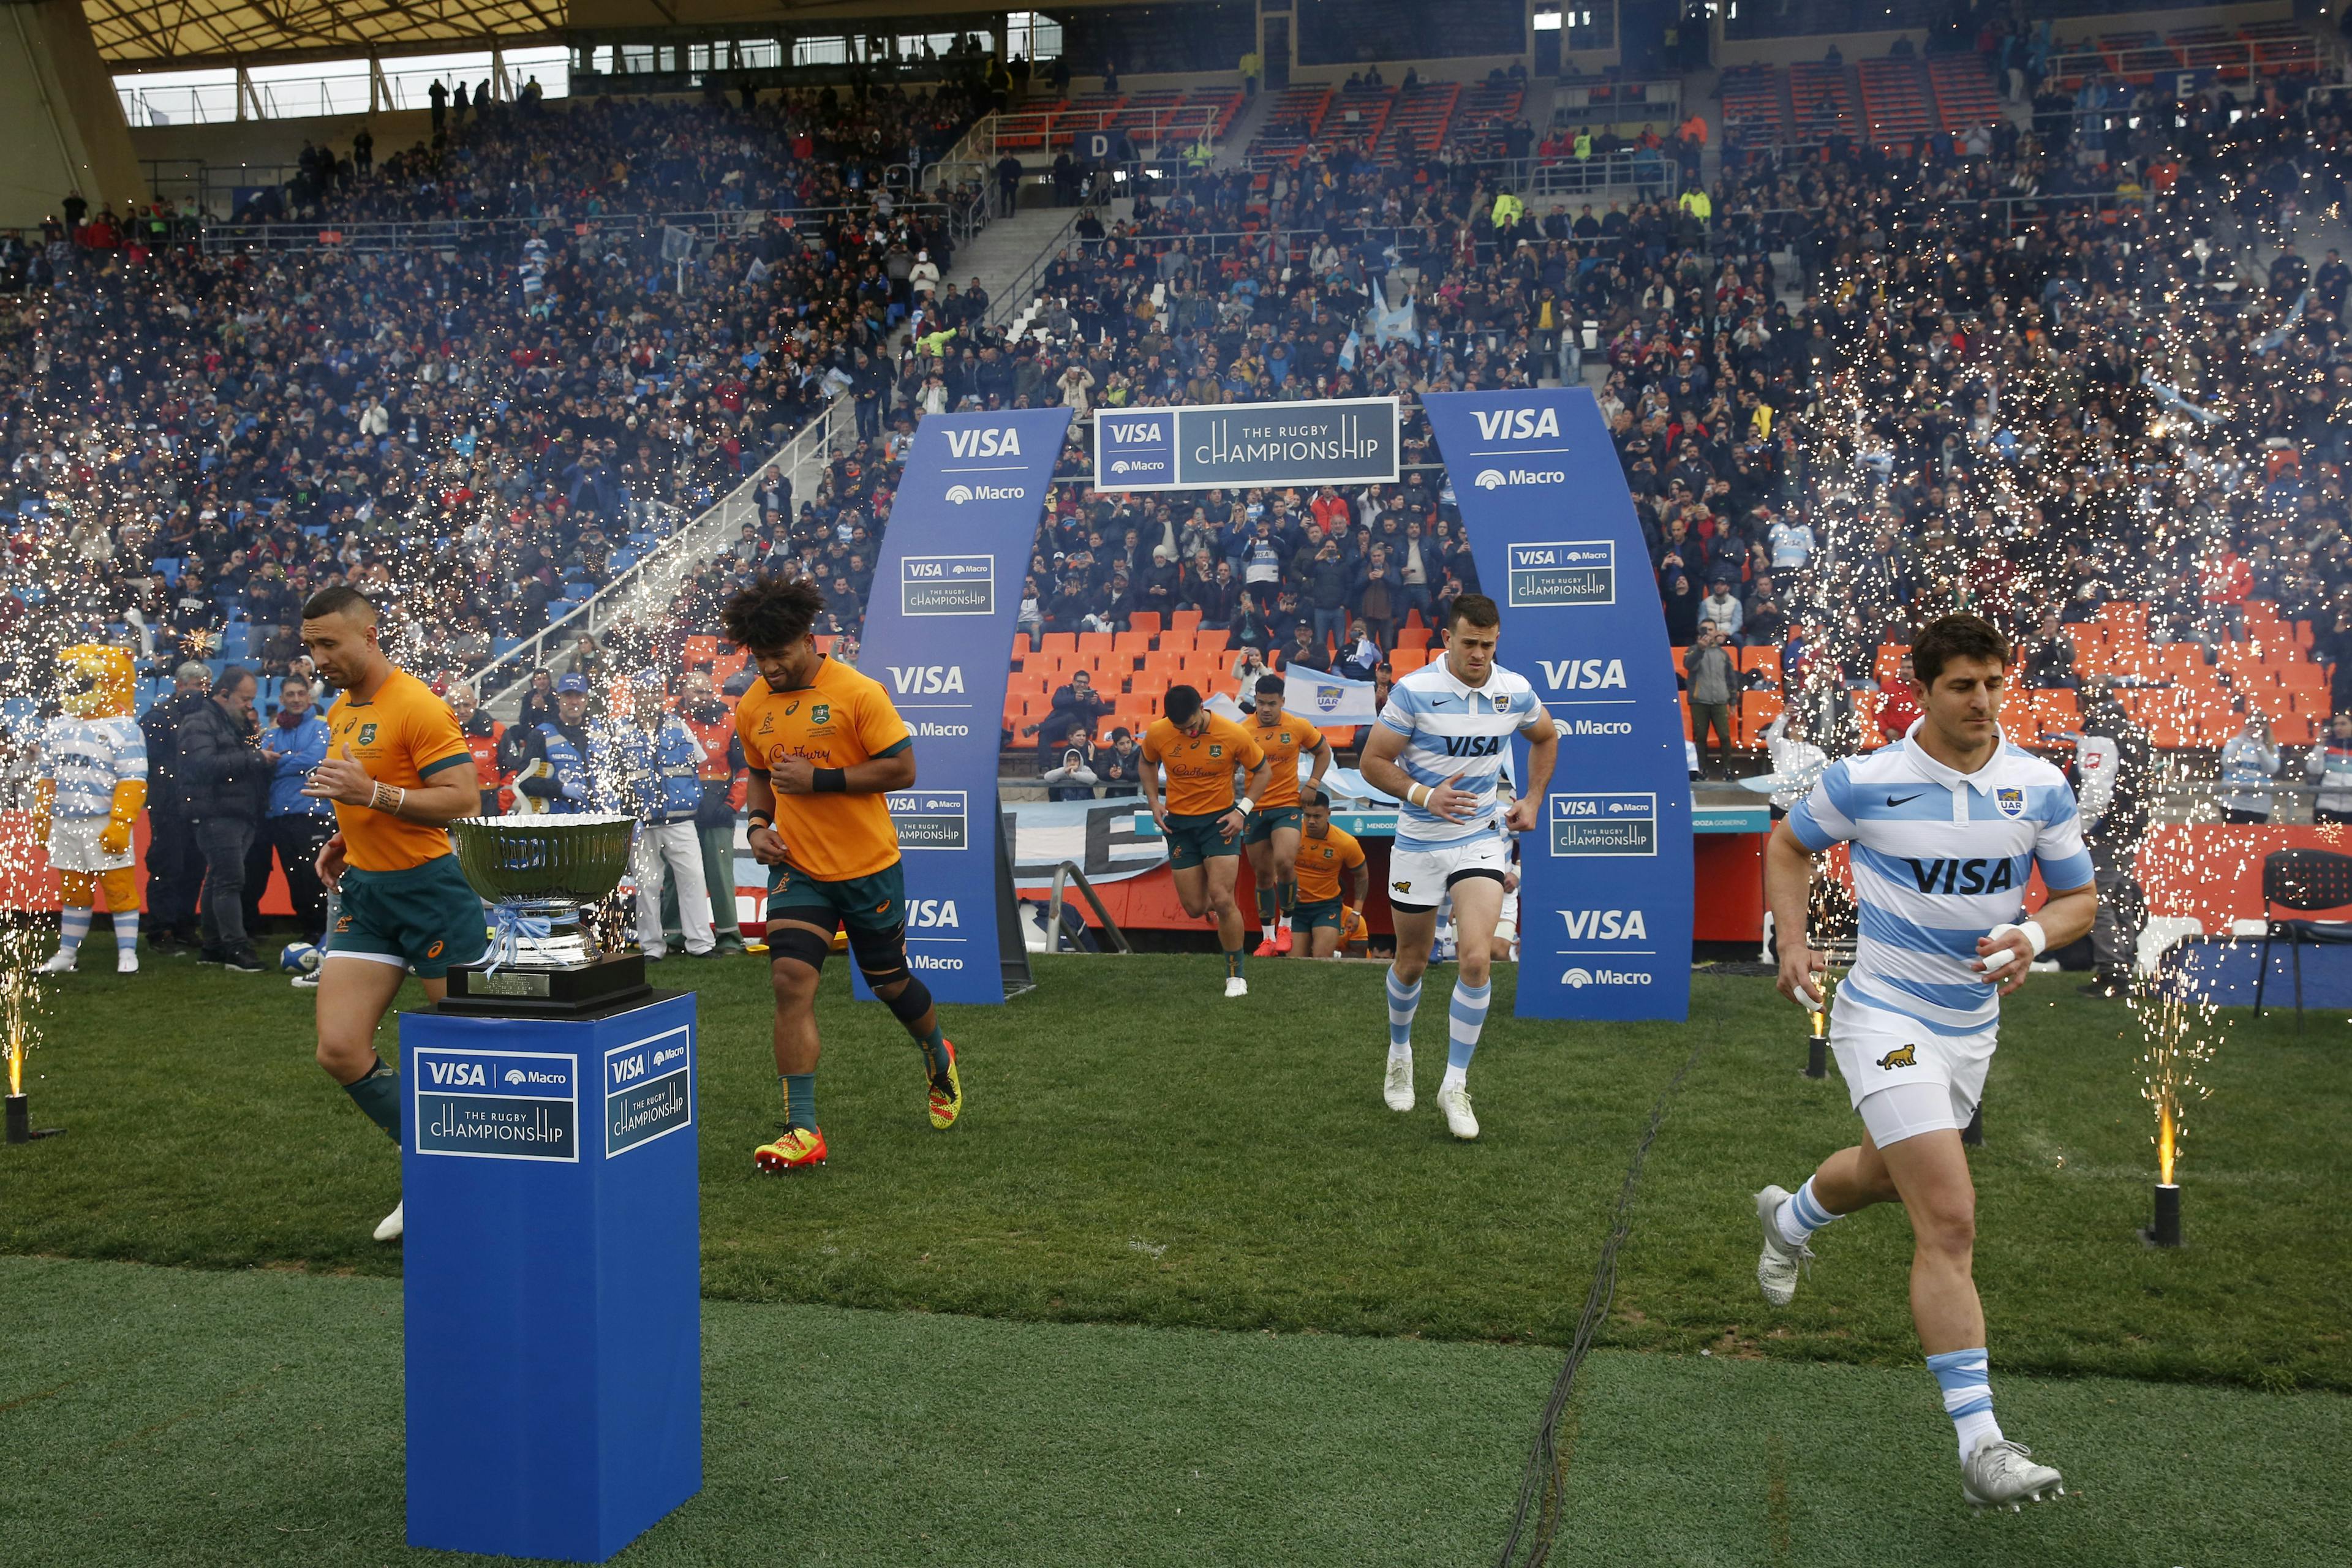 Wallabies and Argentina will meet in Sydney in June. Photo: Getty Images